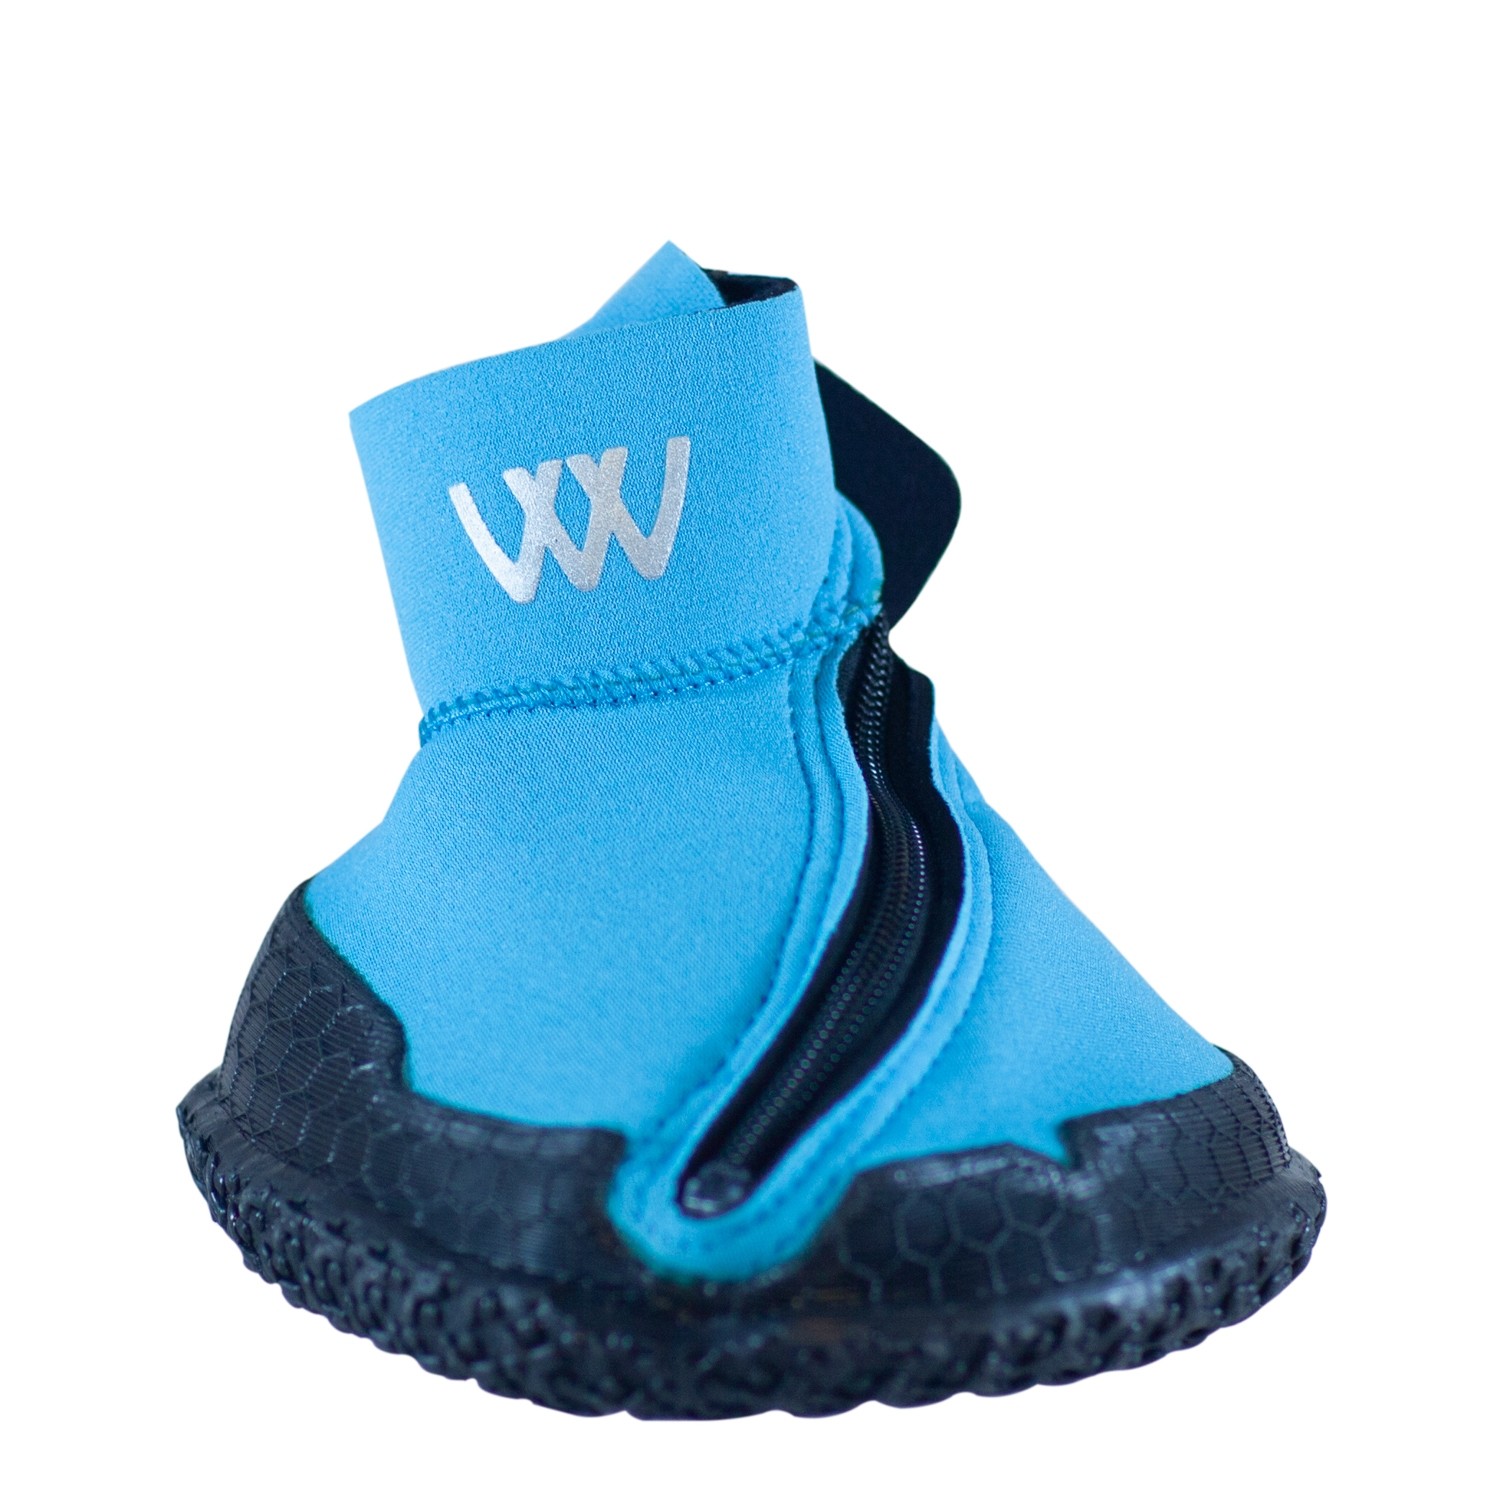 Woof Wear Reusable MEDICAL HOOF BOOT for injury treatment or poultice ALL SIZES 